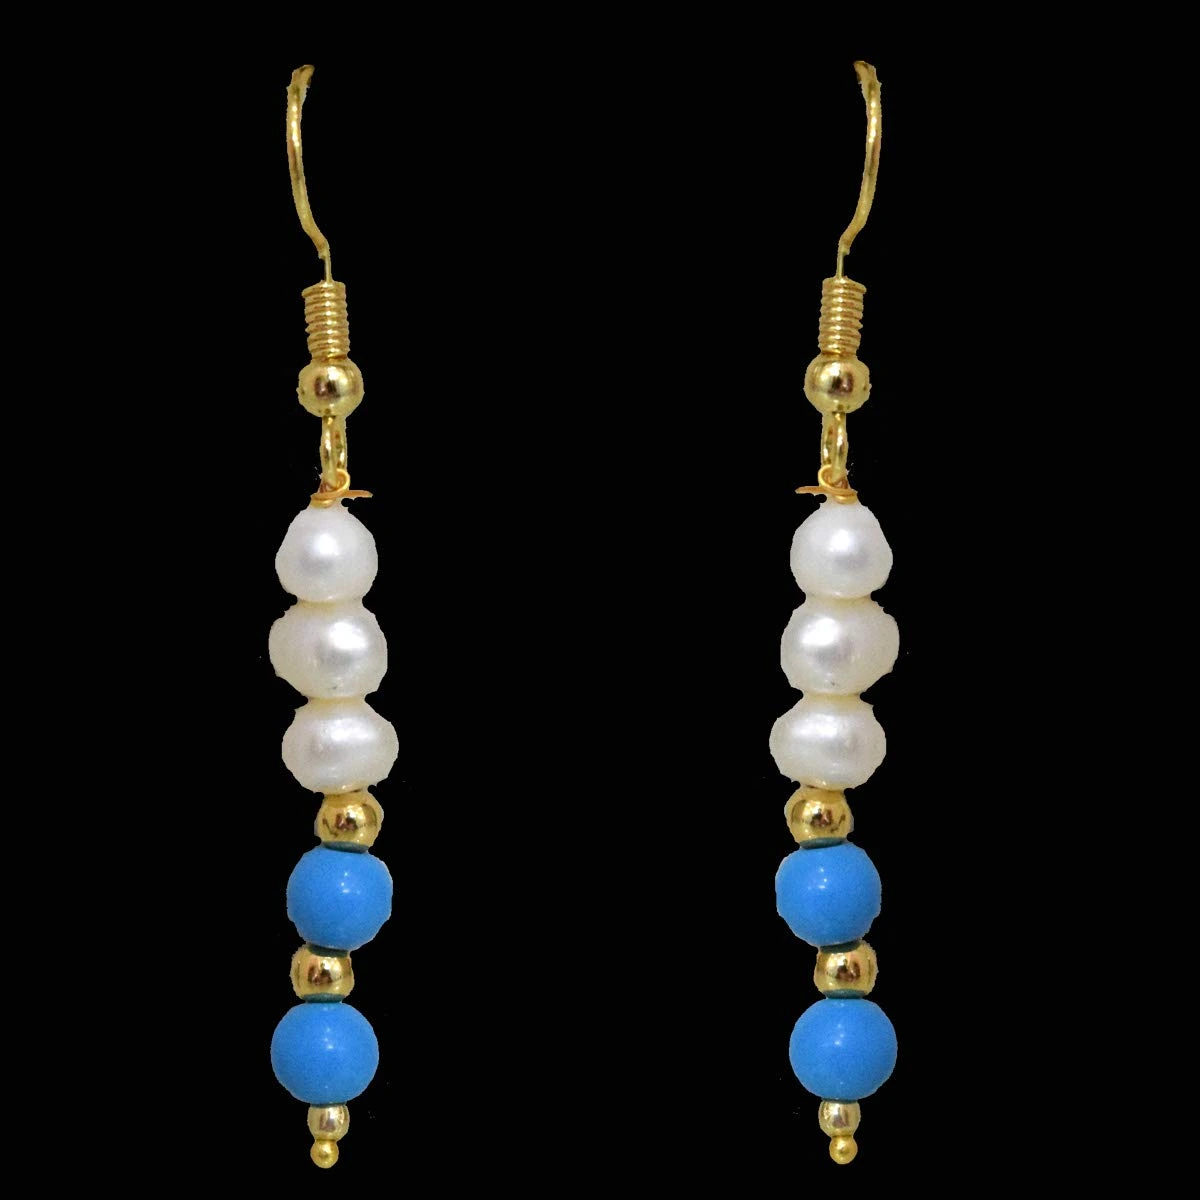 Real Freshwater Pearl, Turquoise & Gold Plated Beads Wire Earring (SE373)